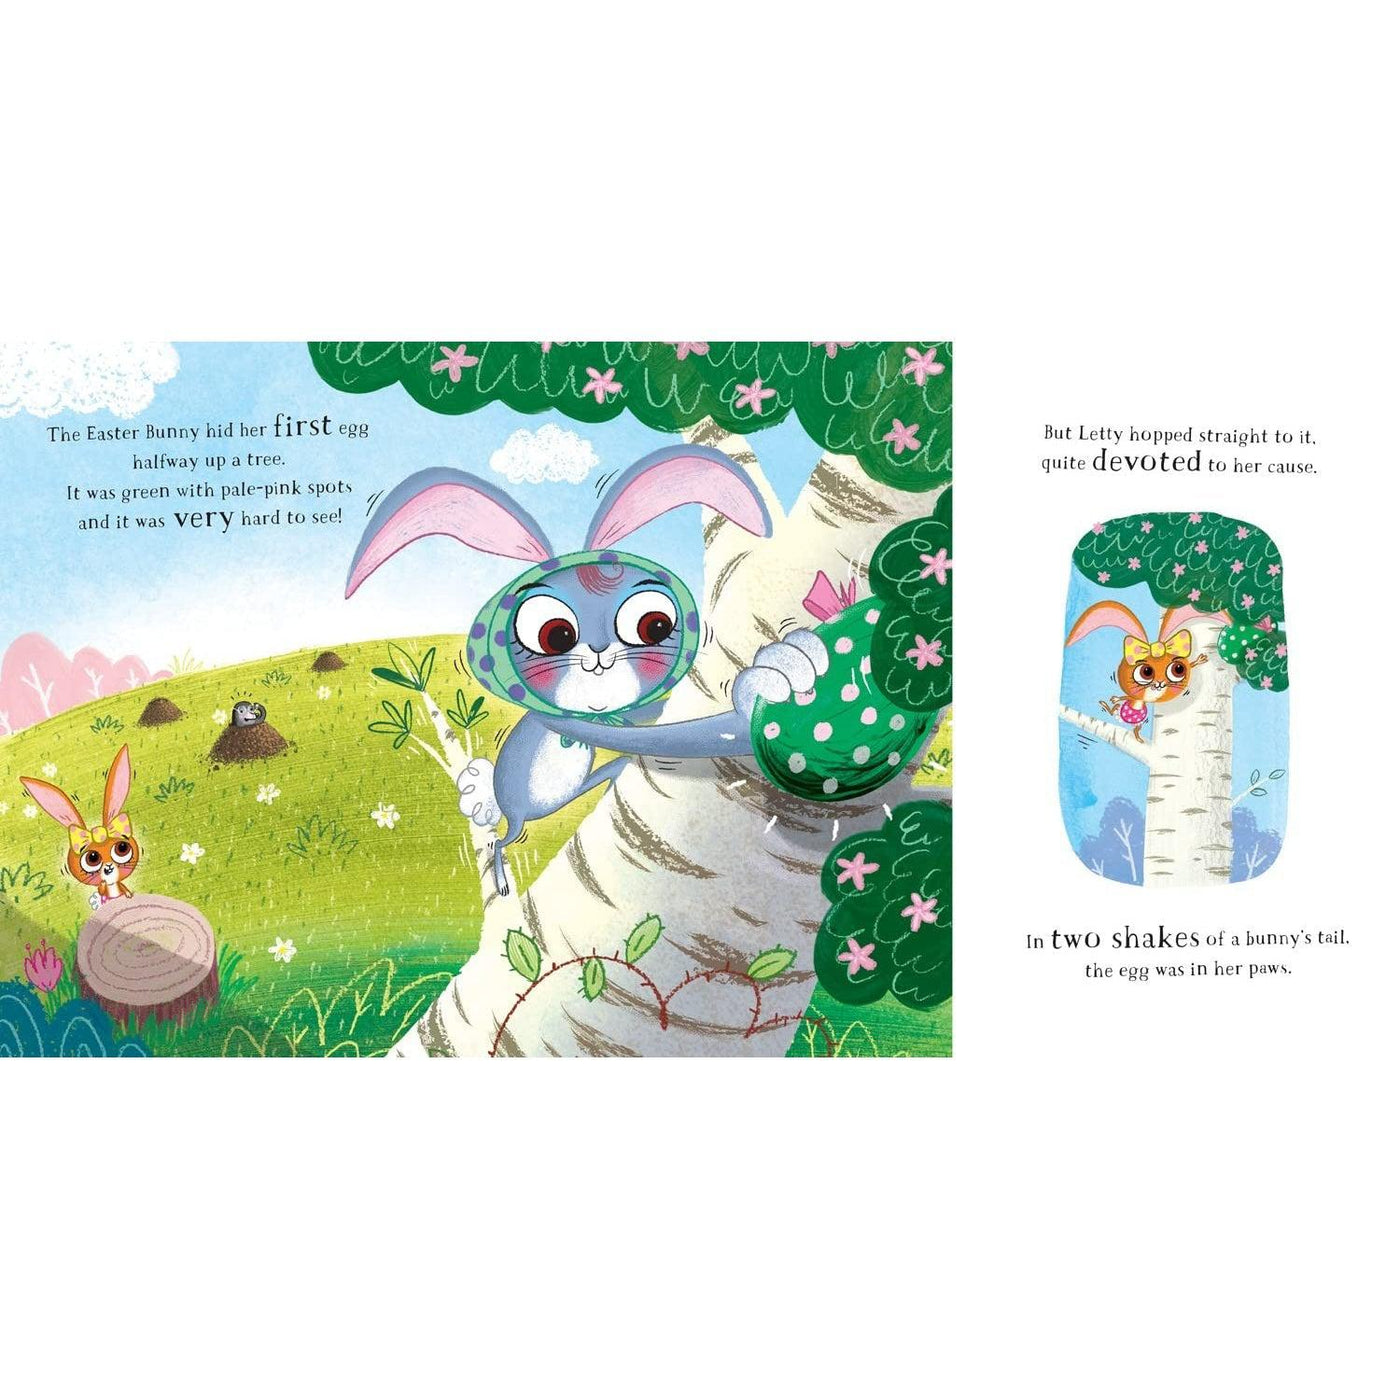 Baby Bunny's Easter Surprise: A Funny Rhyming Picture Book - Perfect For Easter! - Helen Baugh & Nick East